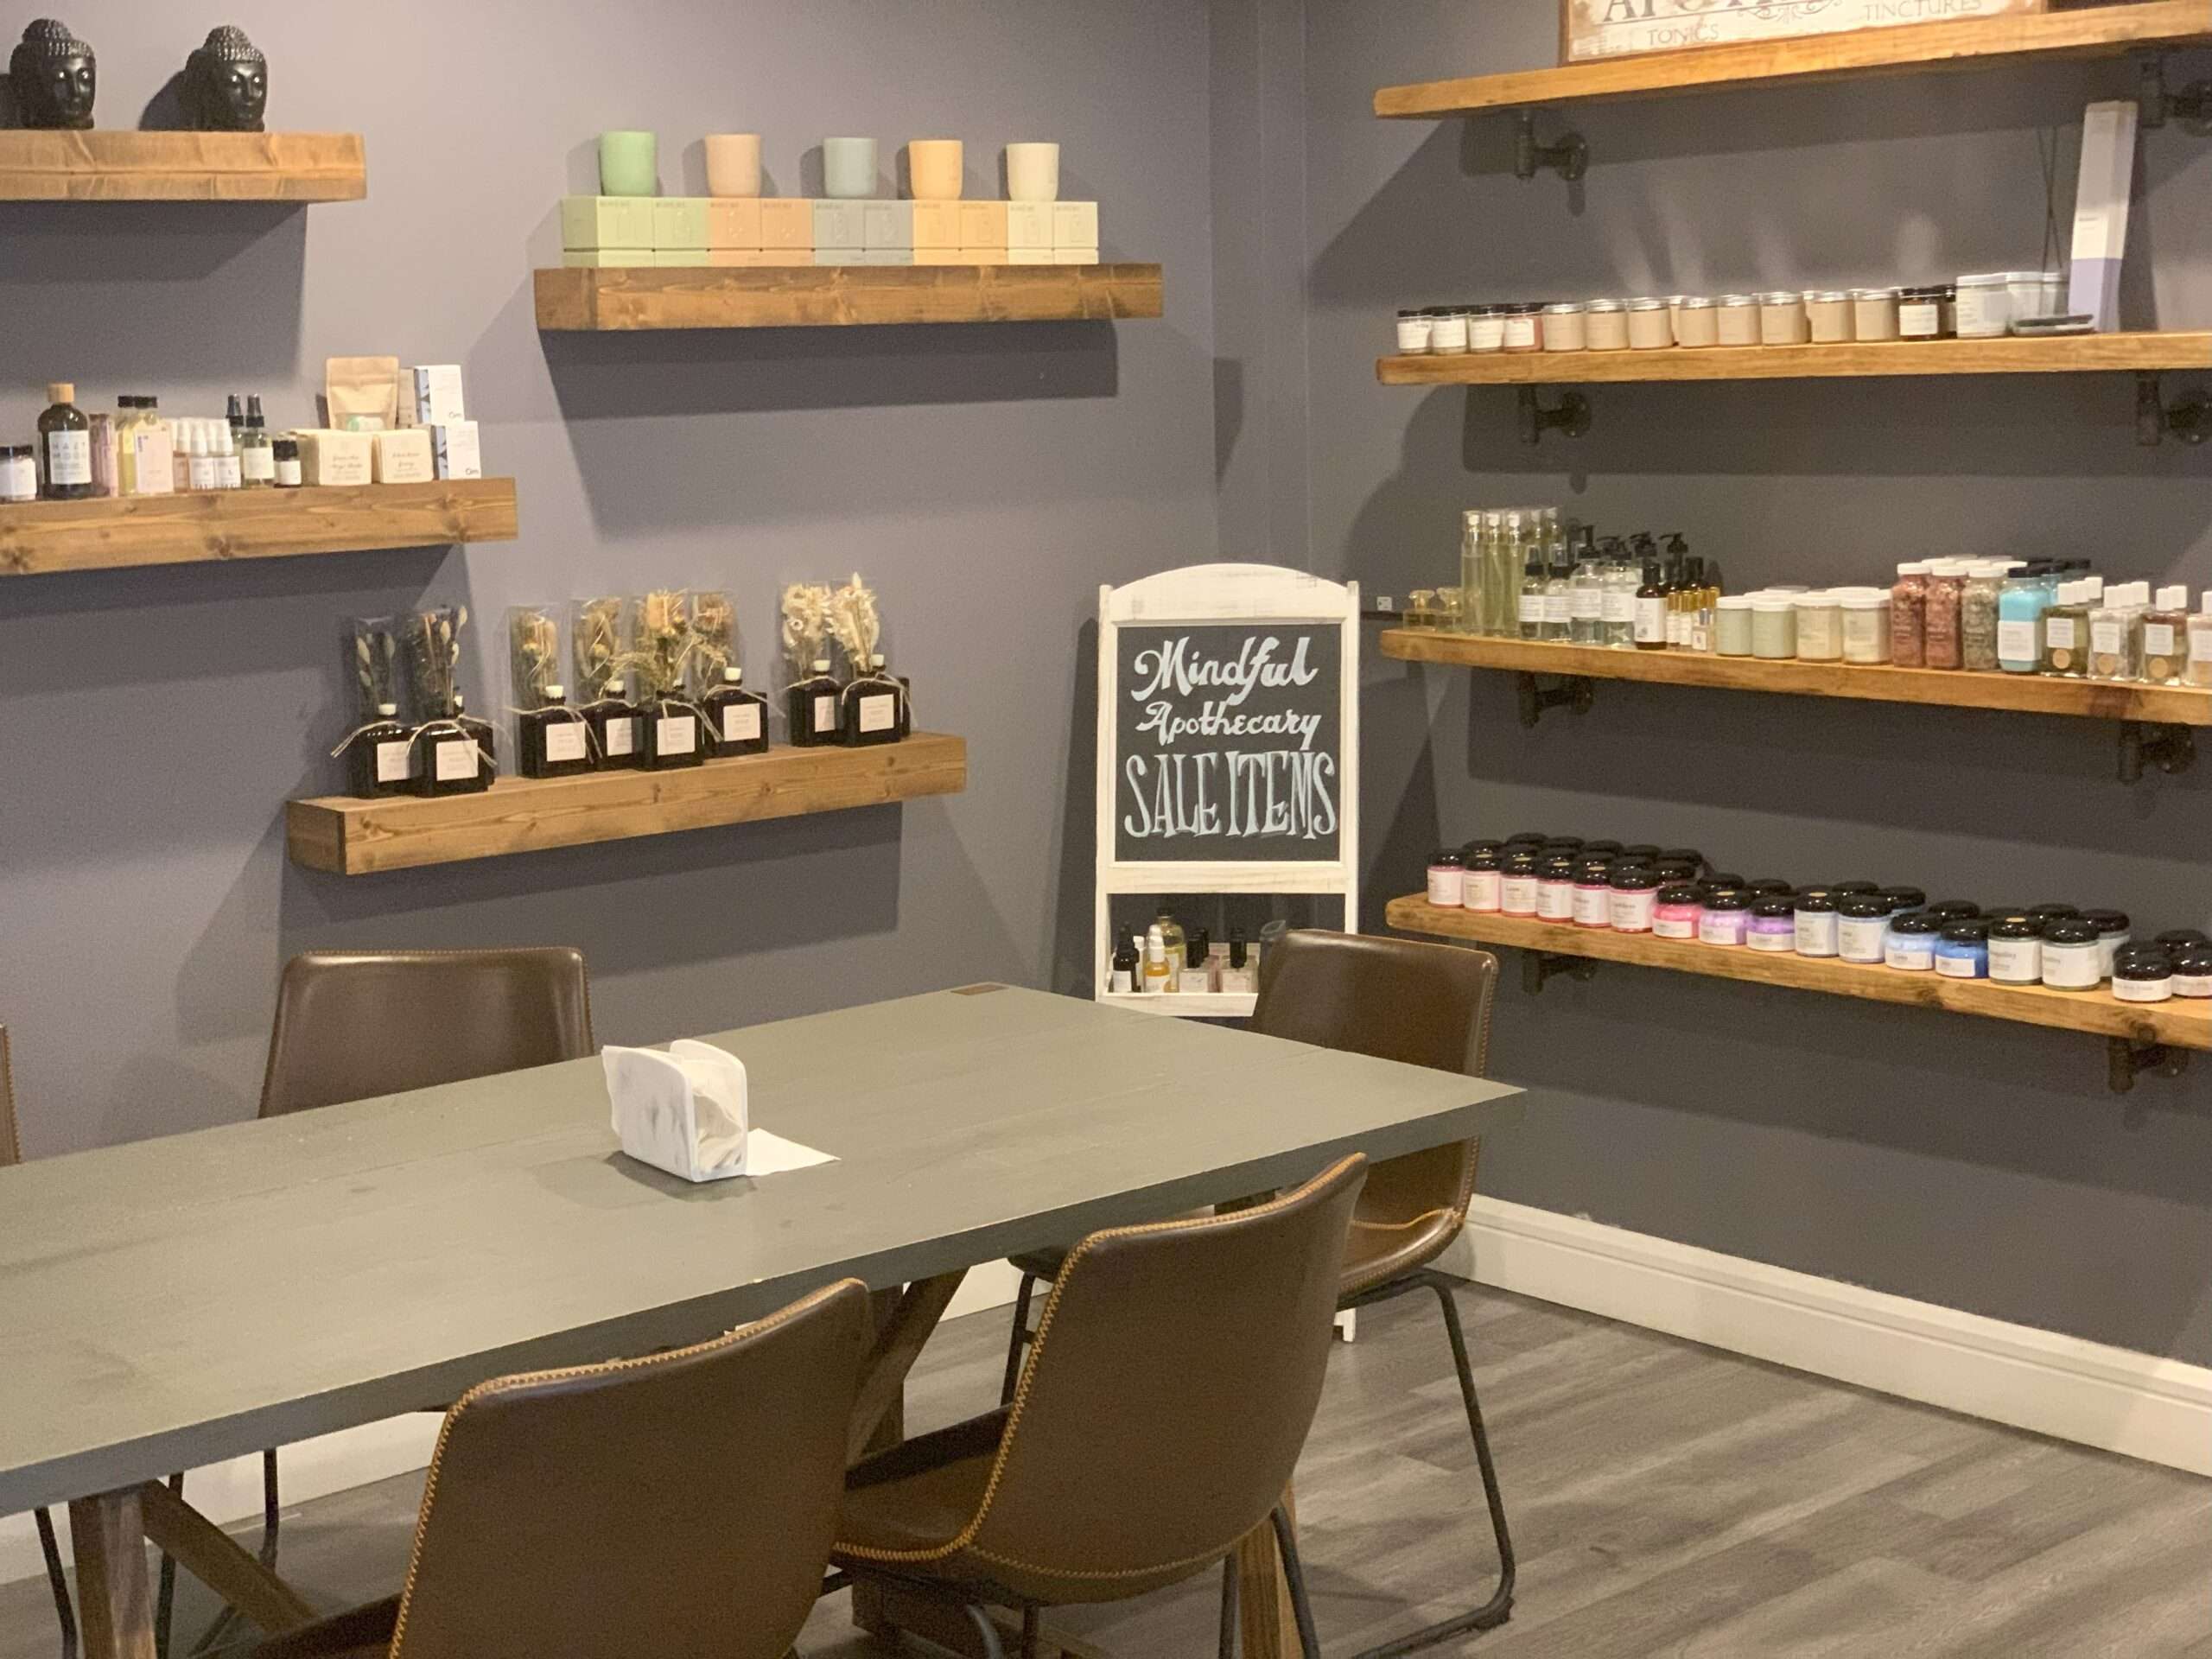 The Mindful Cafe in Ramsey, NJ